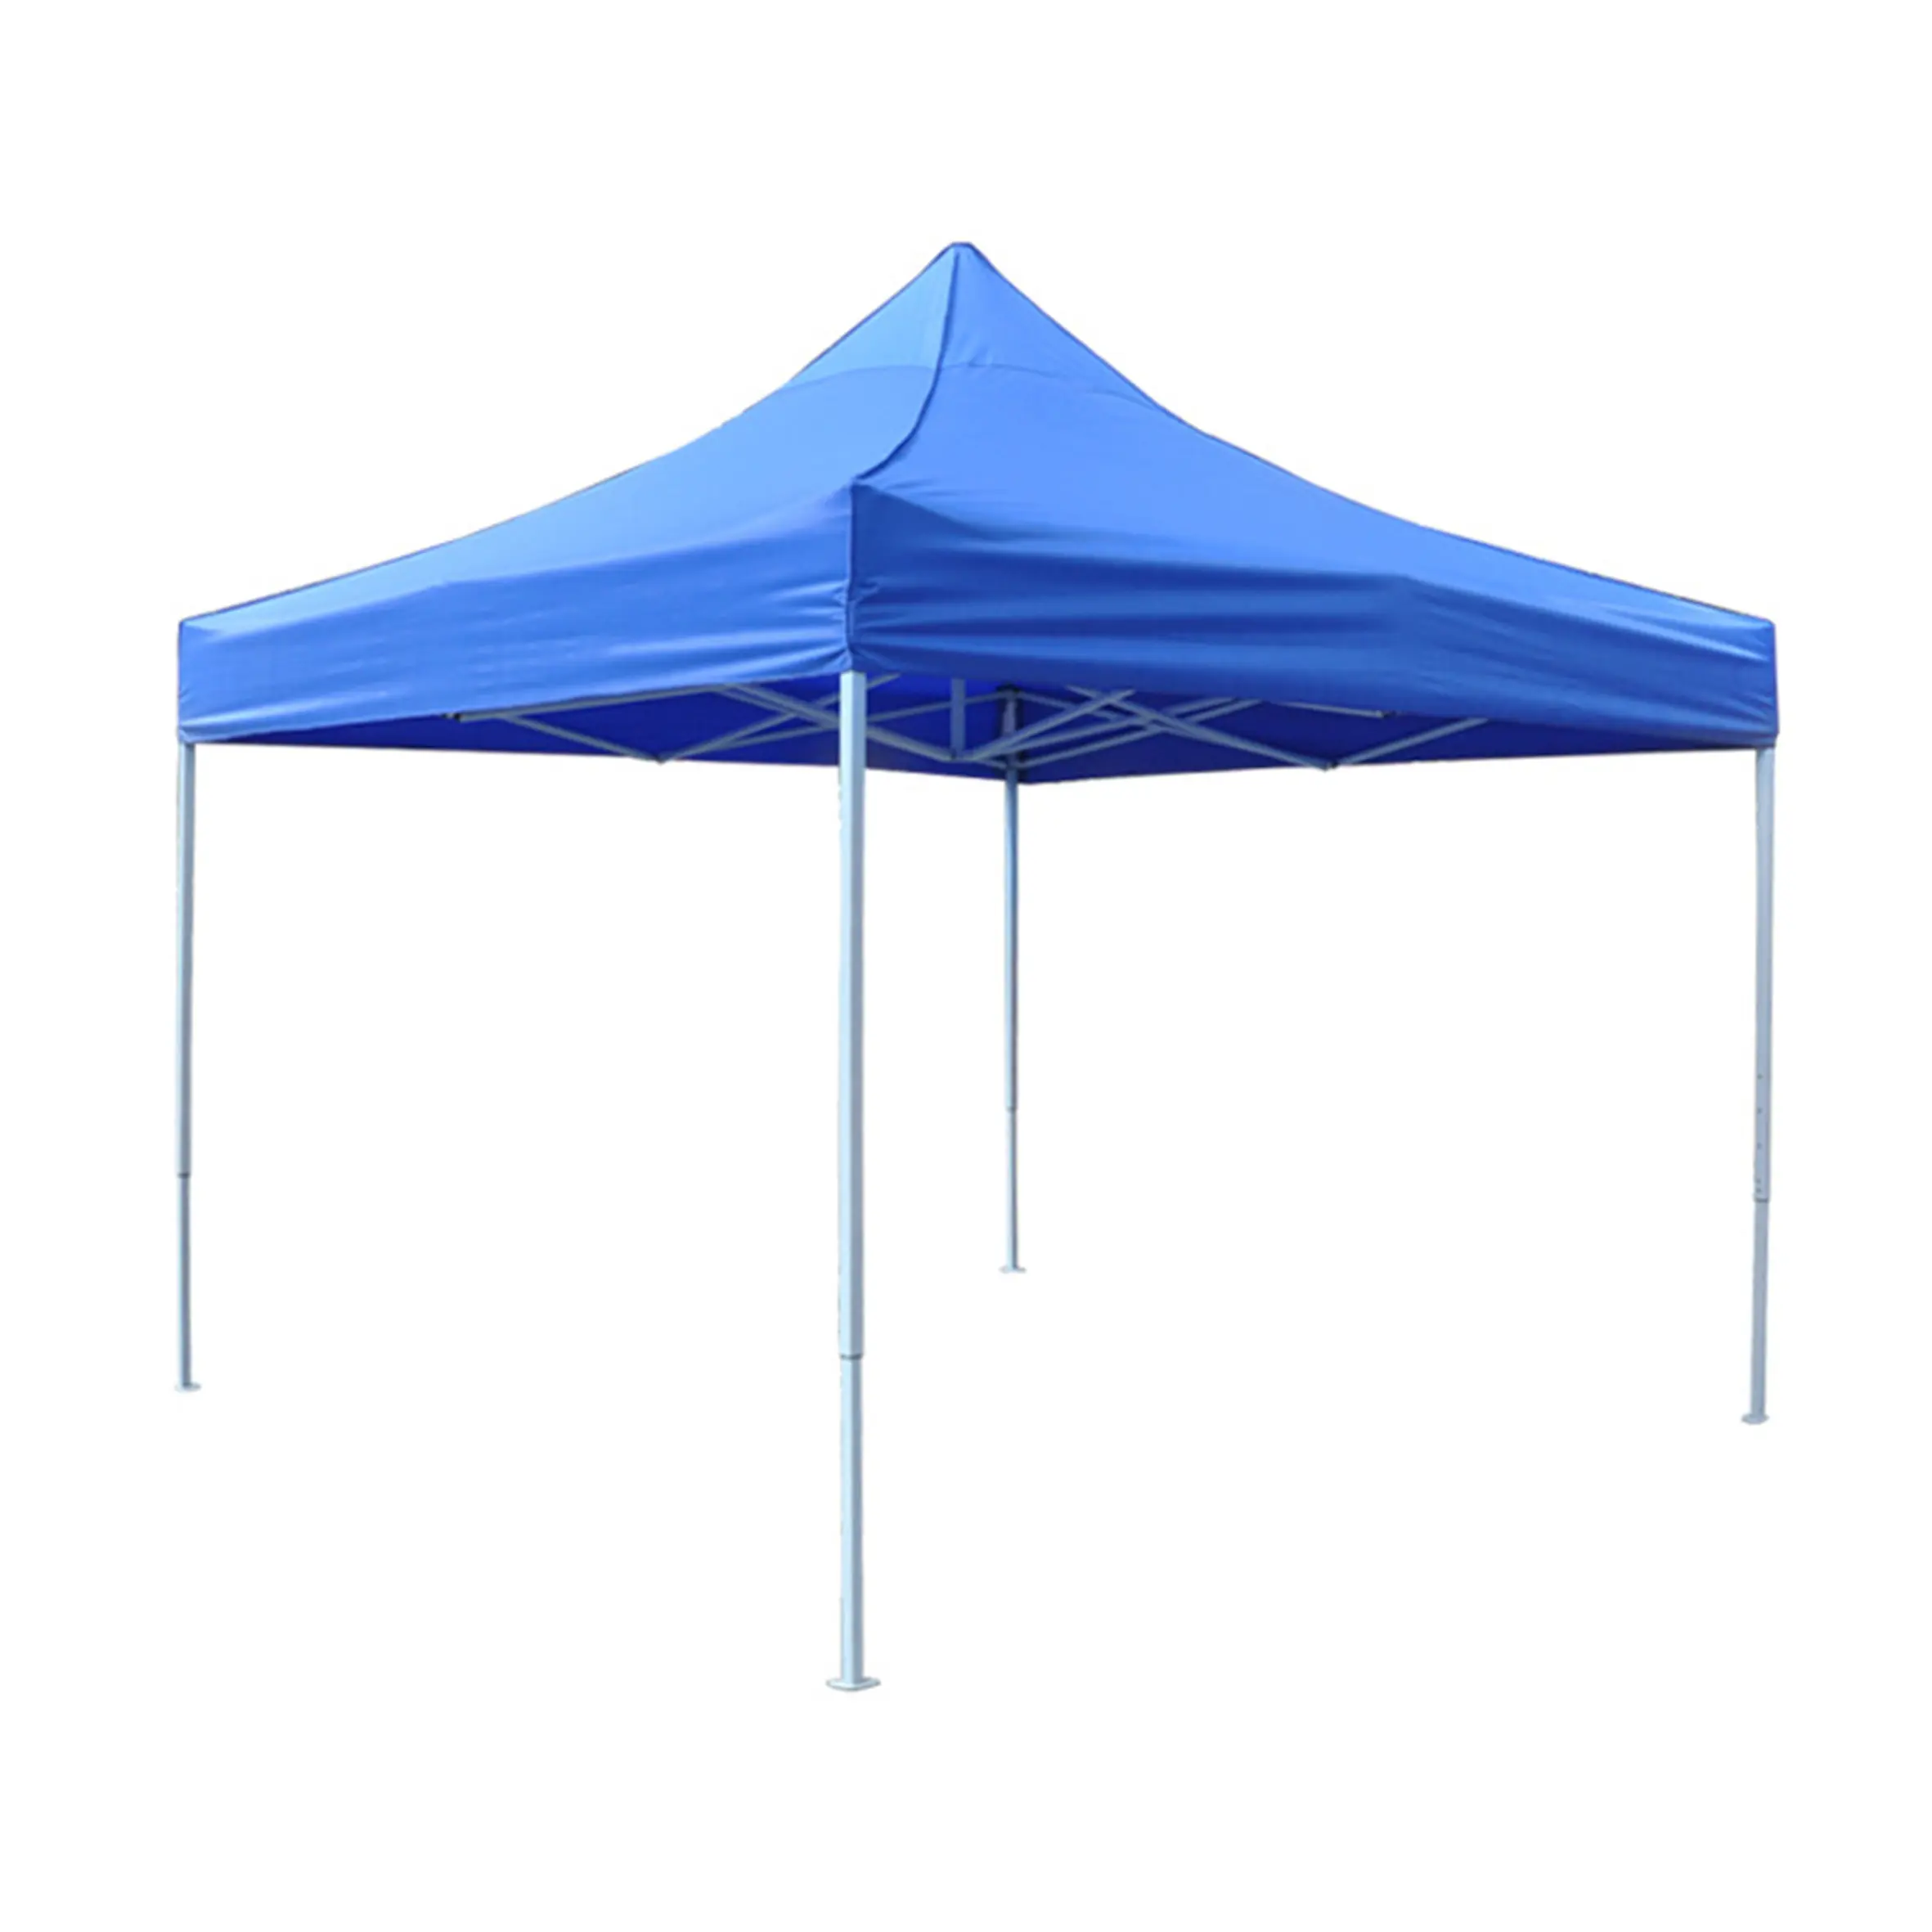 Trade show exhibition events,sports promotional fabric inflatable air canopy marquee gazebos Tents/